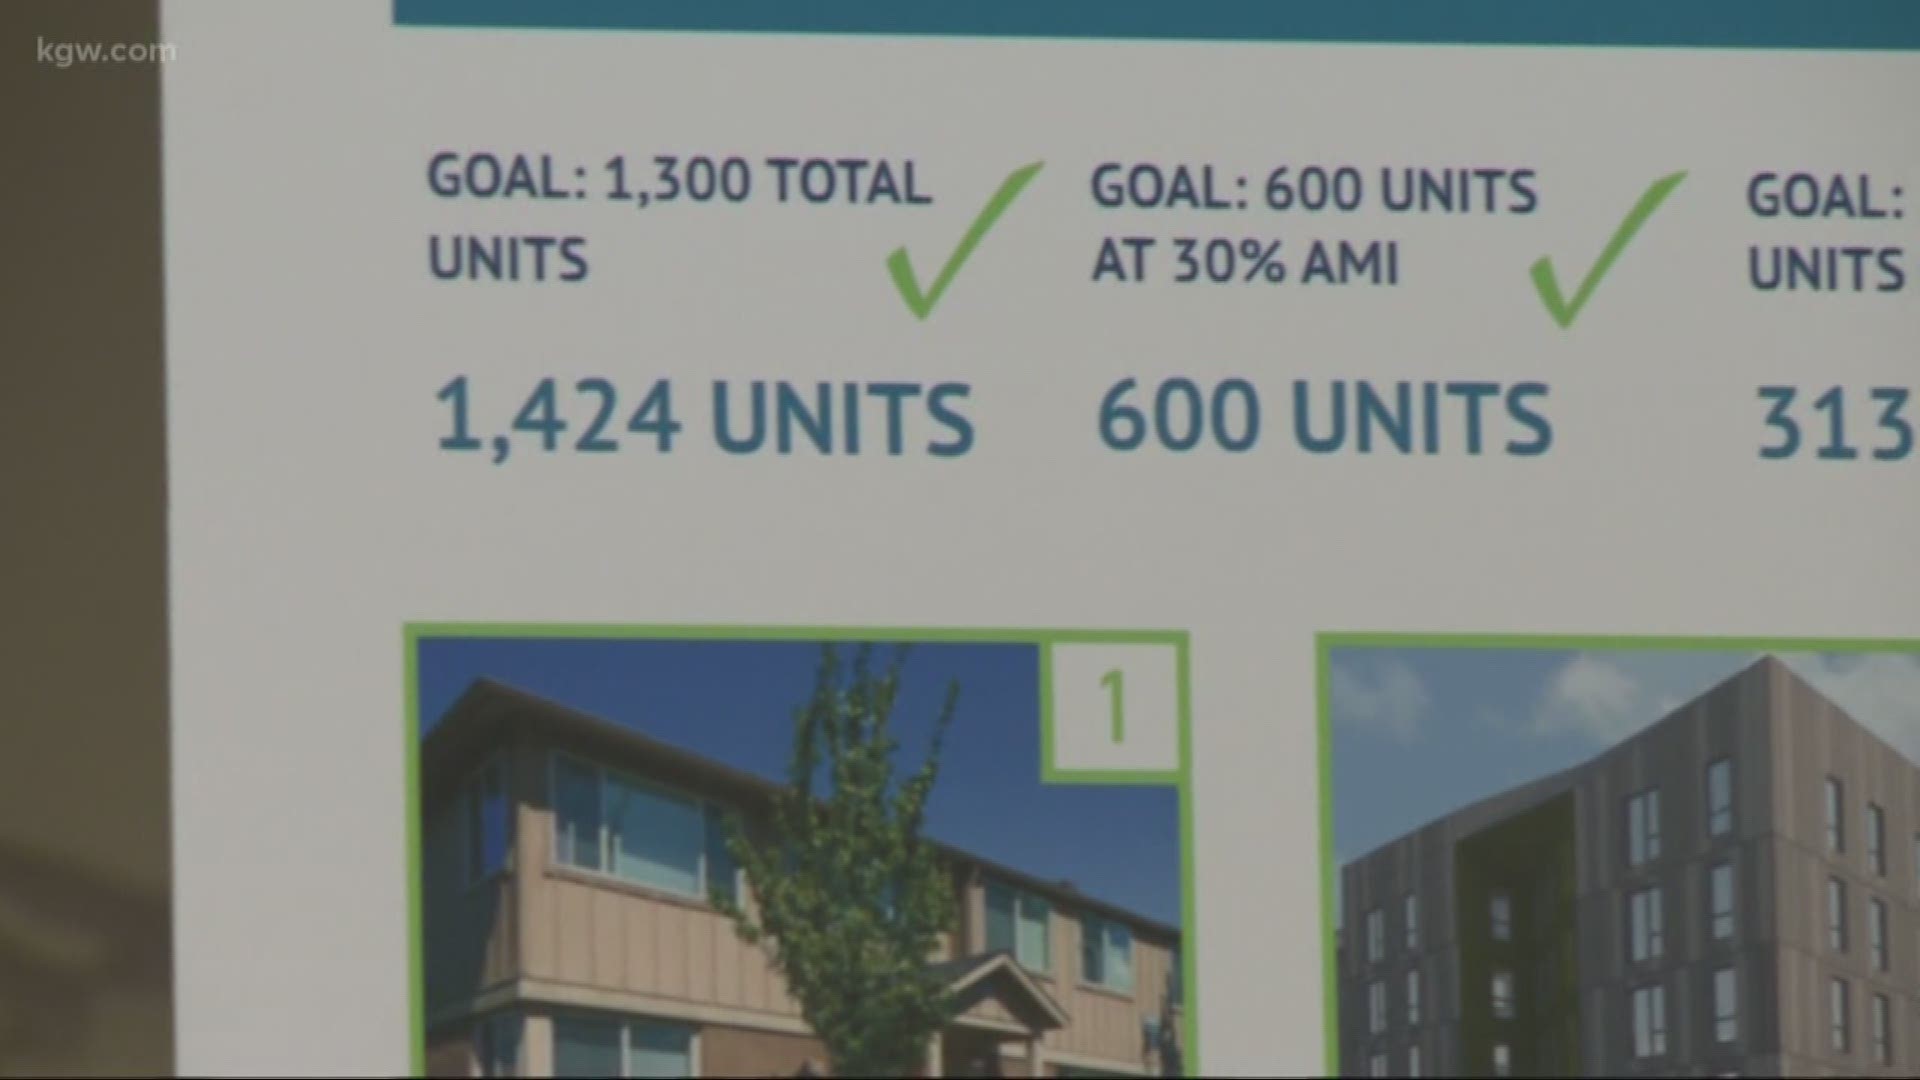 New affordable housing projects in Portland